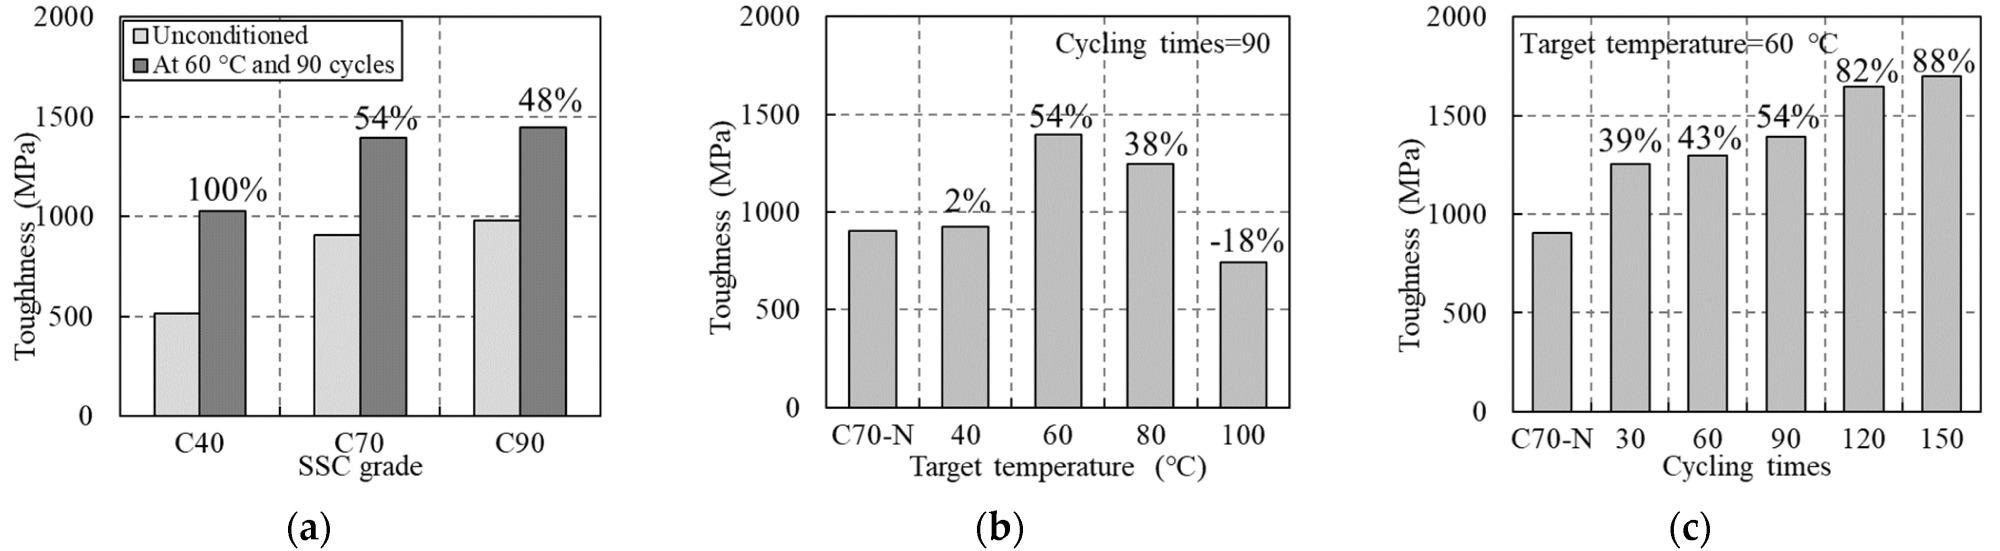 Toughness of SSC: (a) effects of SSC grade; (b) effects of target temperature; (c) effects of cycling times.